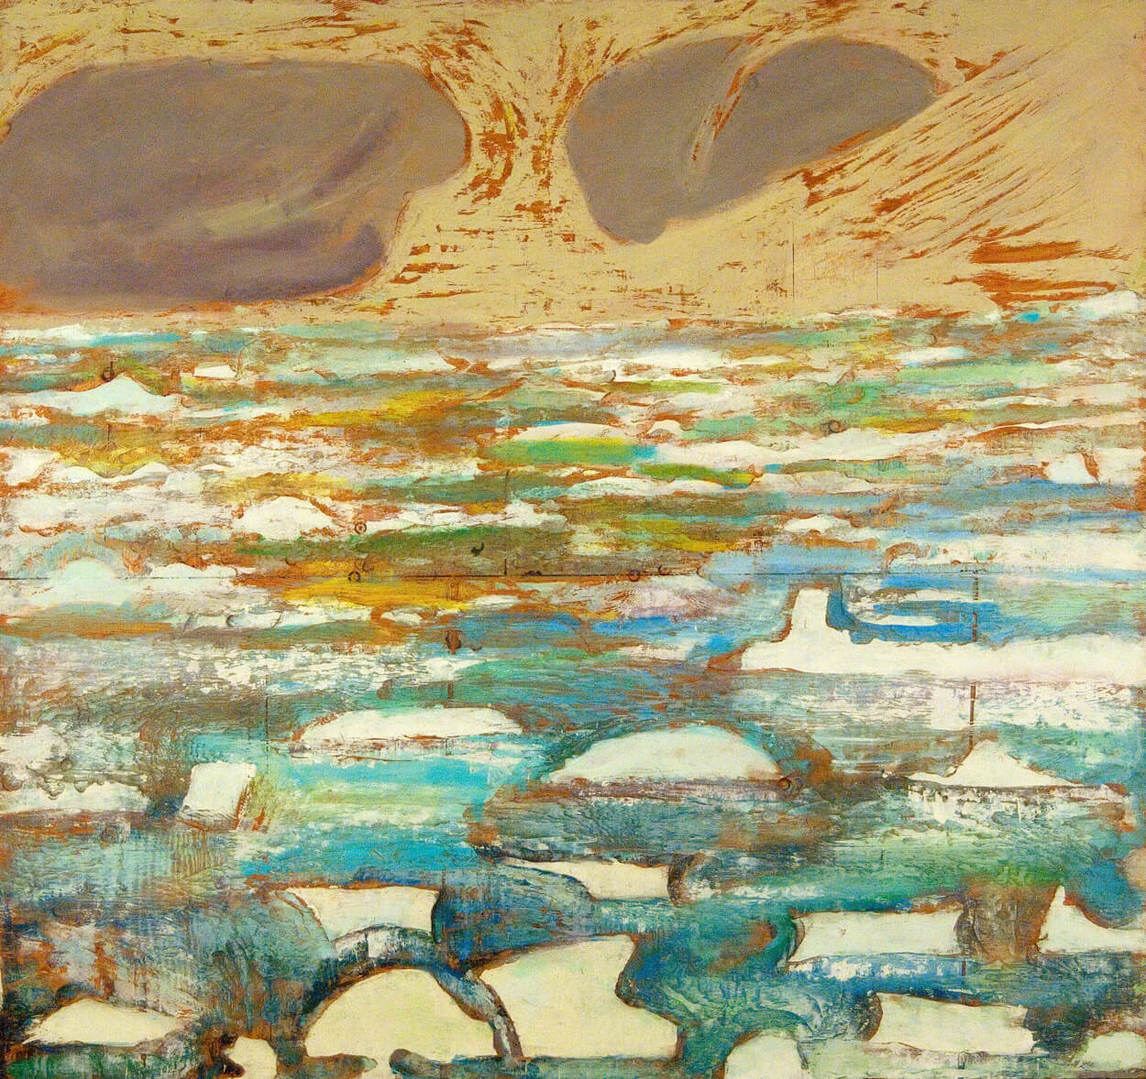 Paterson Ewen, Ice Floes at Resolute Bay (Glaces flottantes à Resolute Bay), 1983